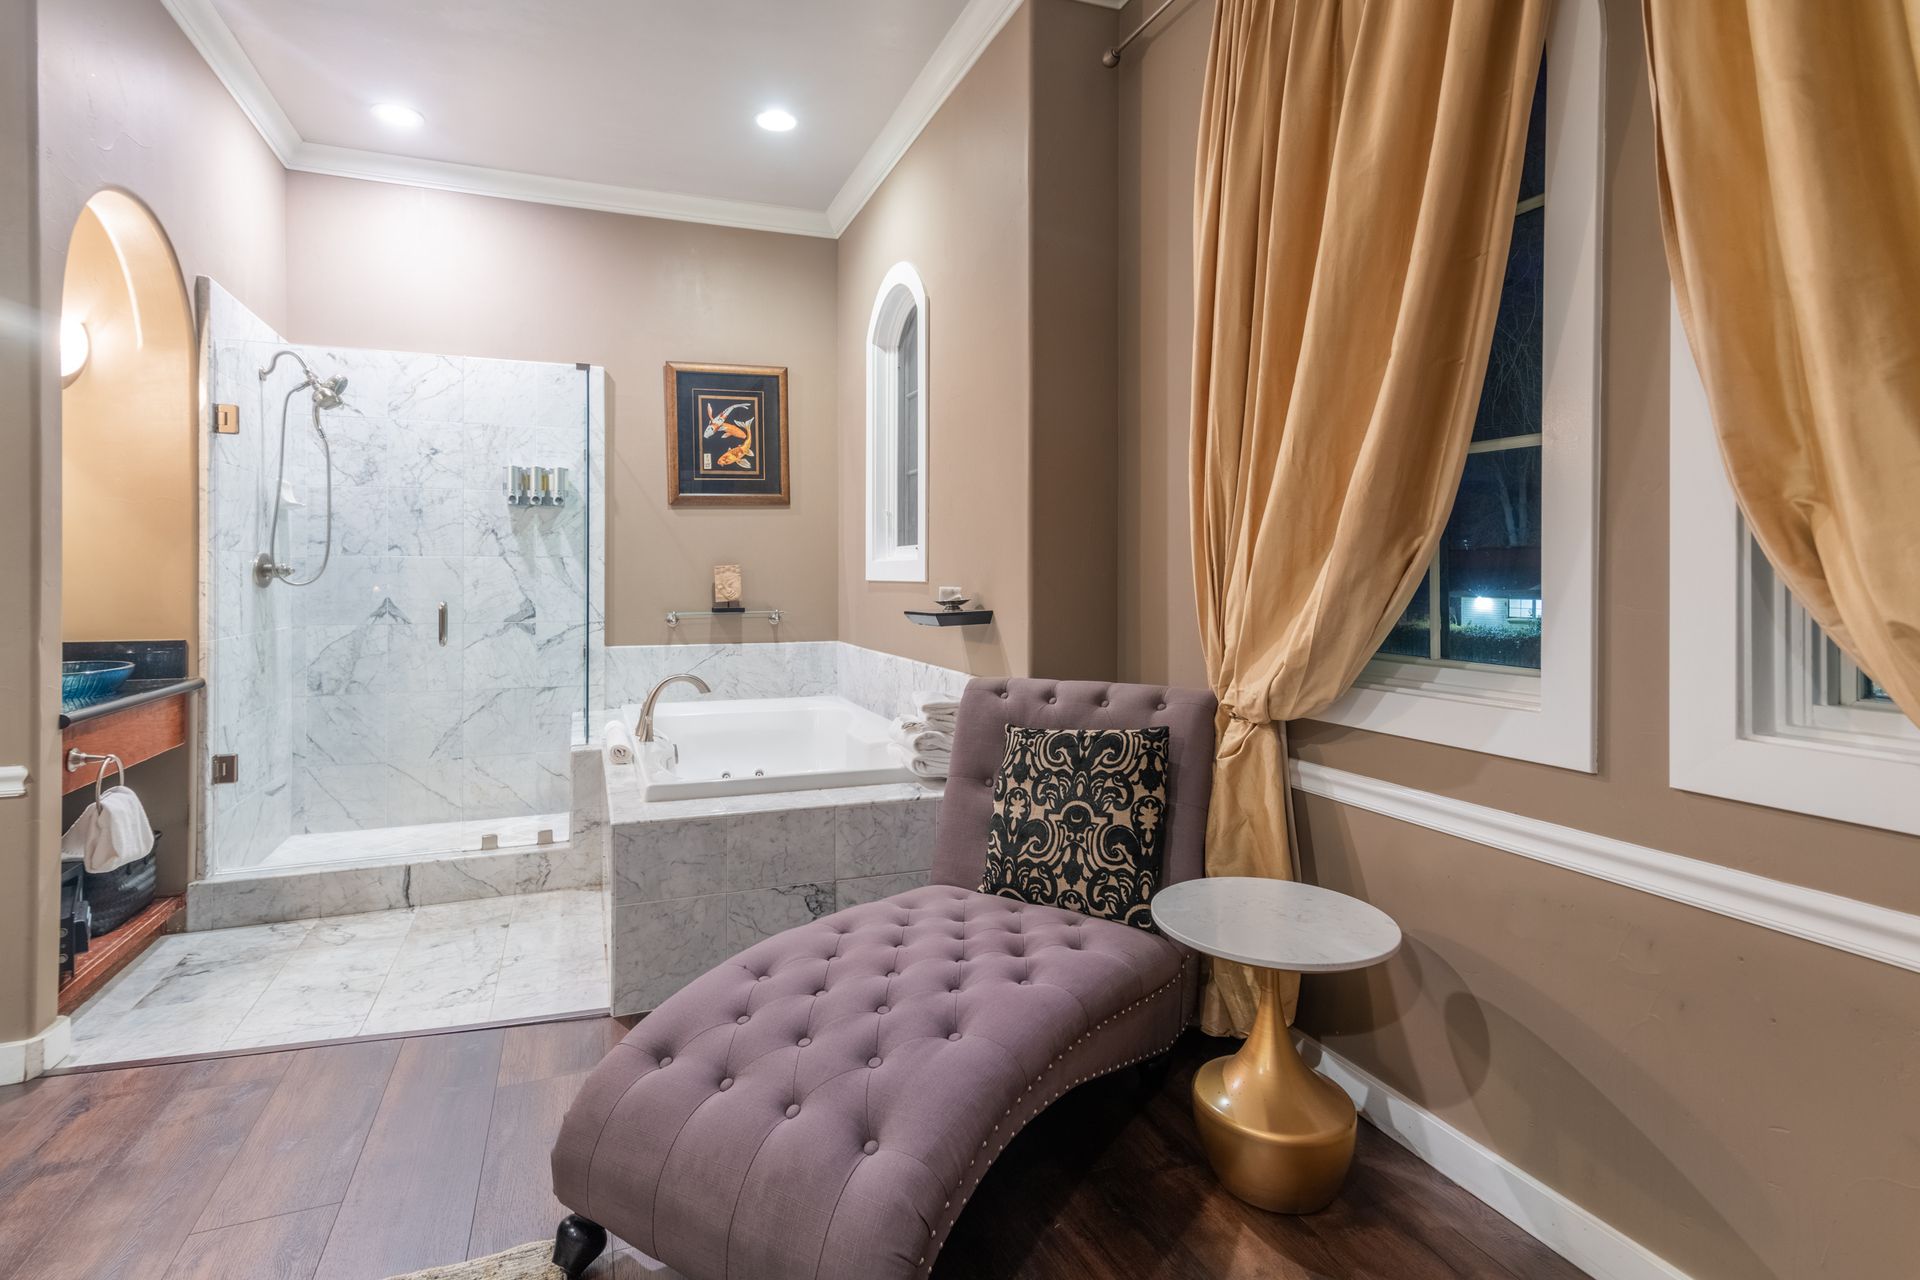 A bathroom with a purple chaise lounge and a jacuzzi tub.